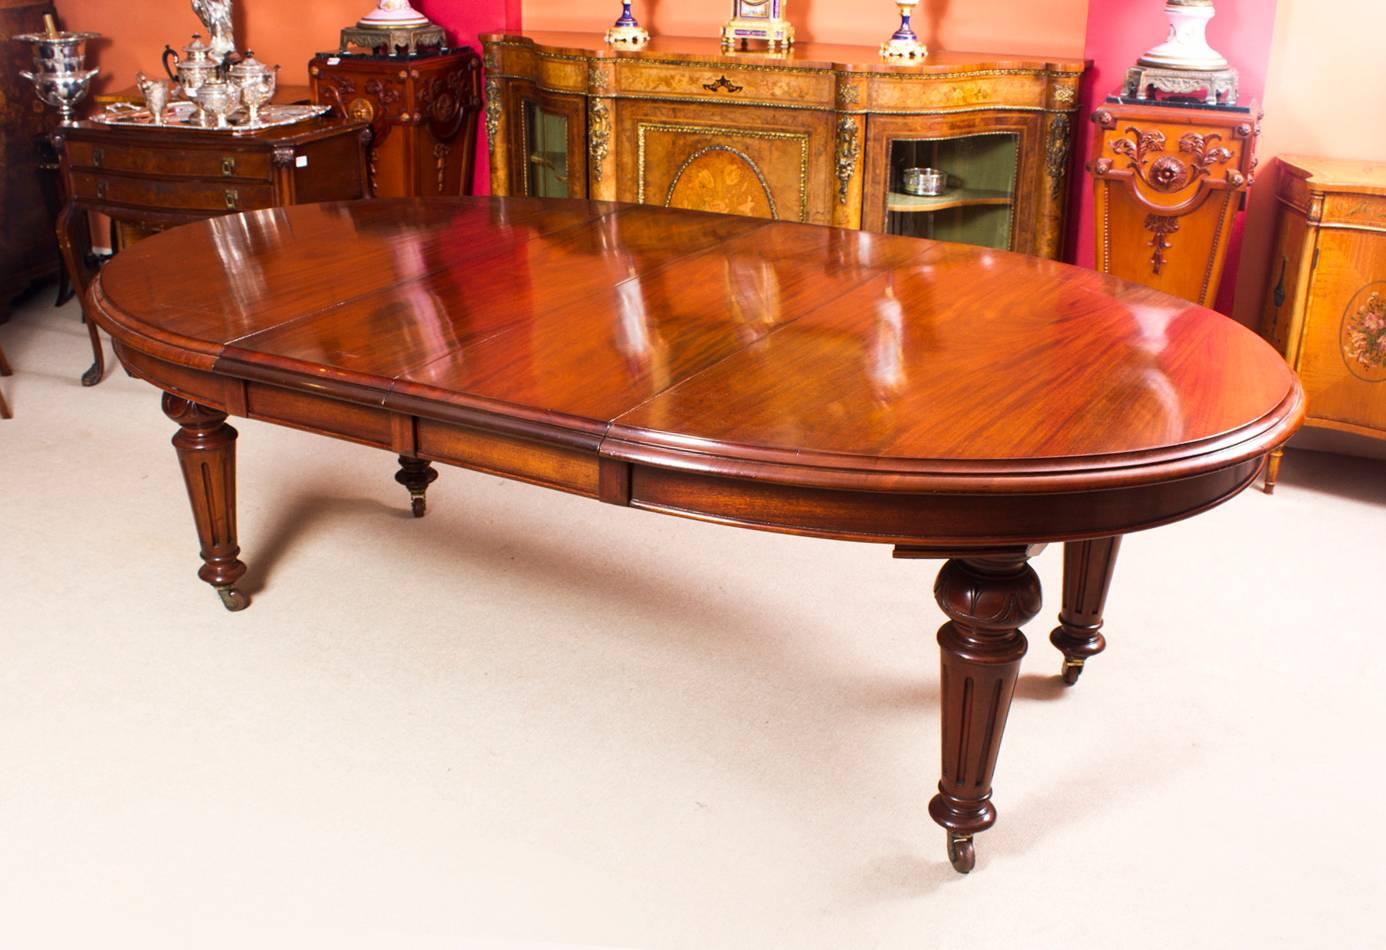 This is a fabulous dining set comprising an antique Victorian mahogany oval extending dining table, circa 1860 in date with a set of eight Victorian style balloon back dining chairs.

The table has two original leaves and has been handcrafted from